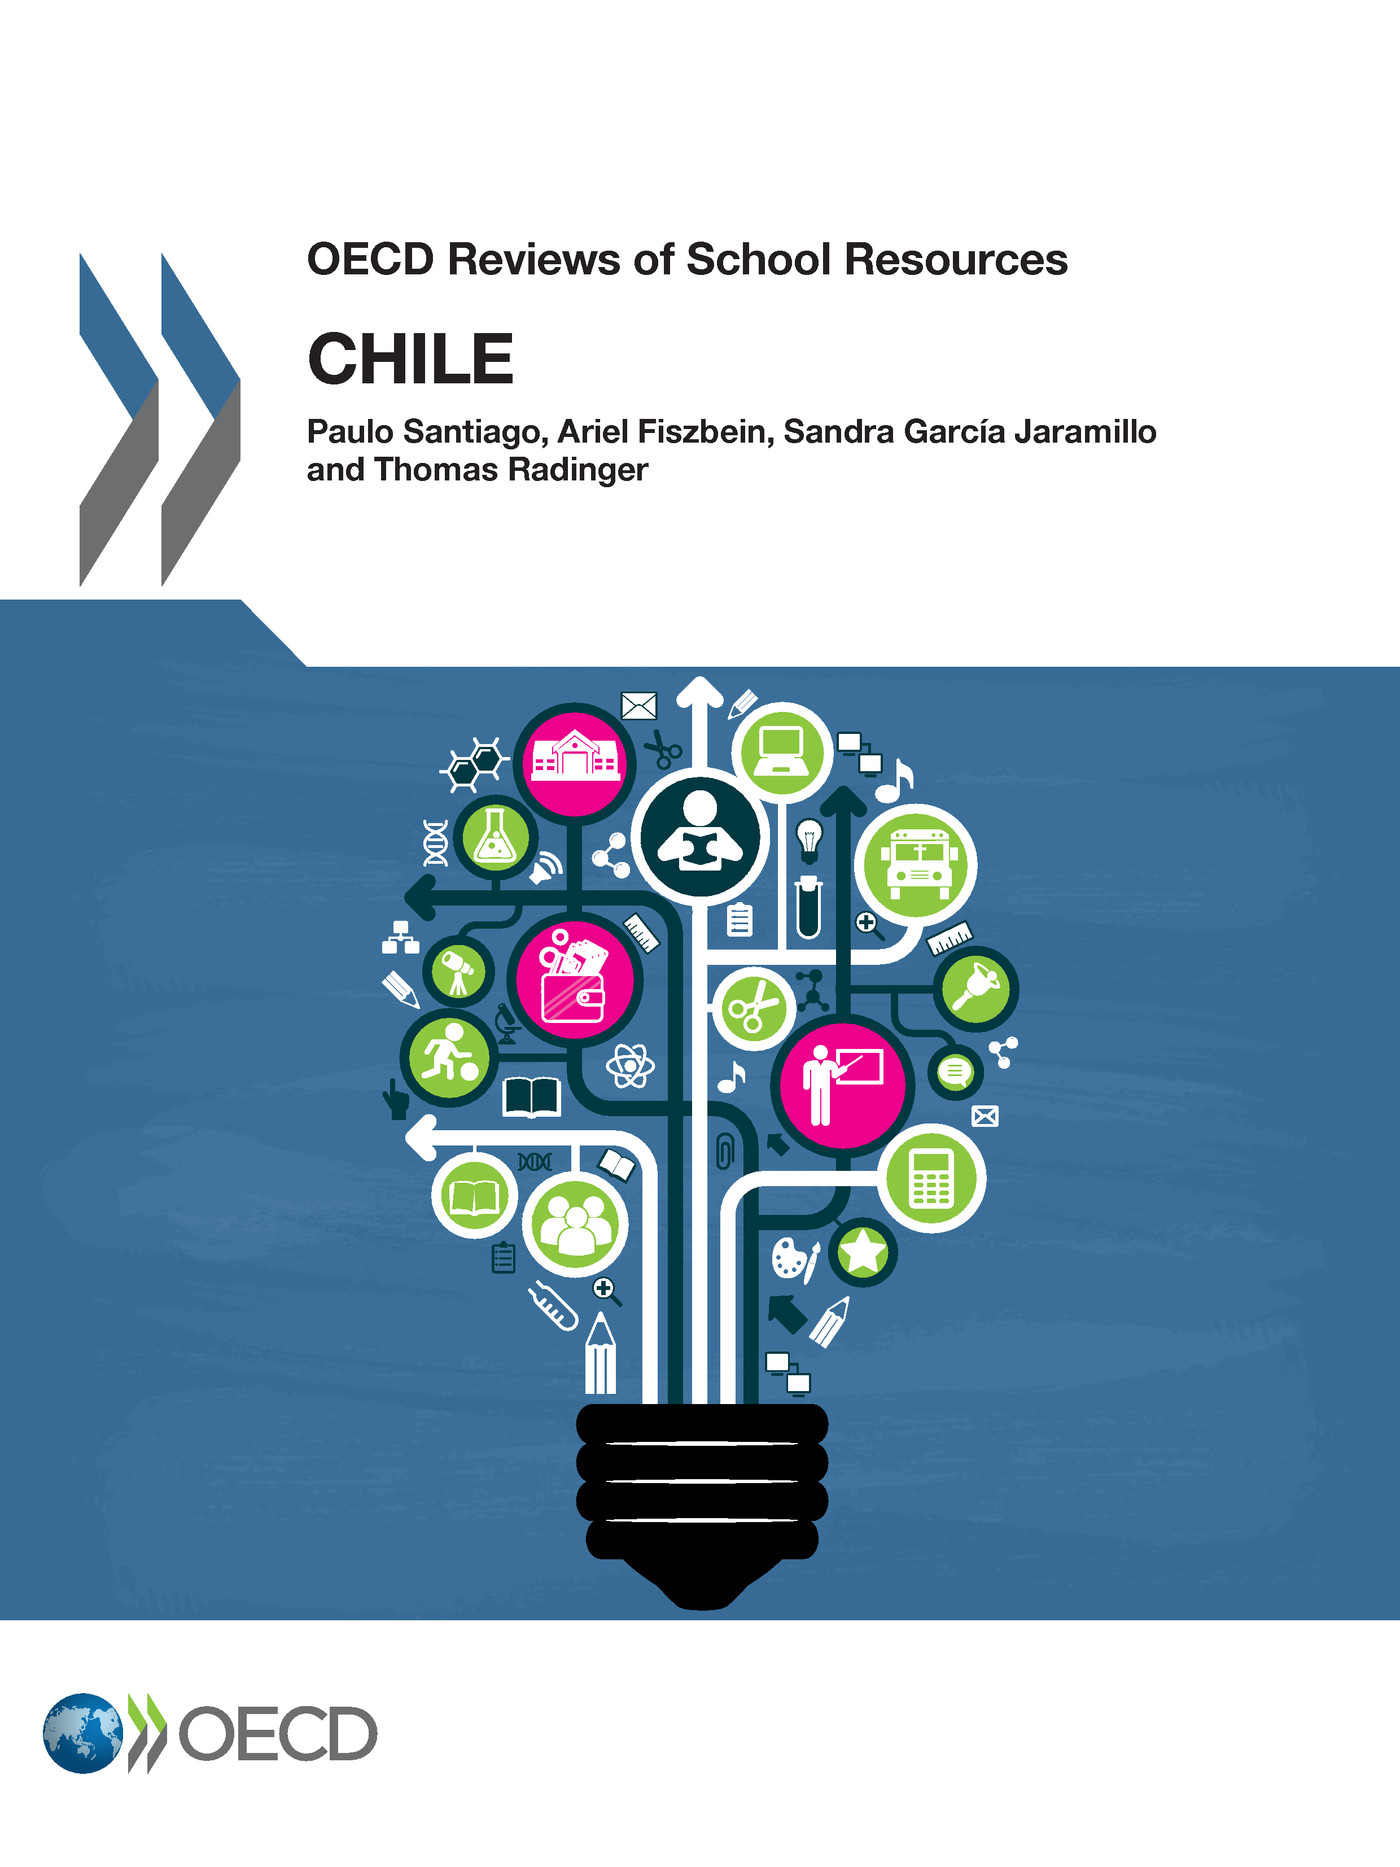 OECD Reviews of School Resources: Chile 2017 -  Collectif - OCDE / OECD